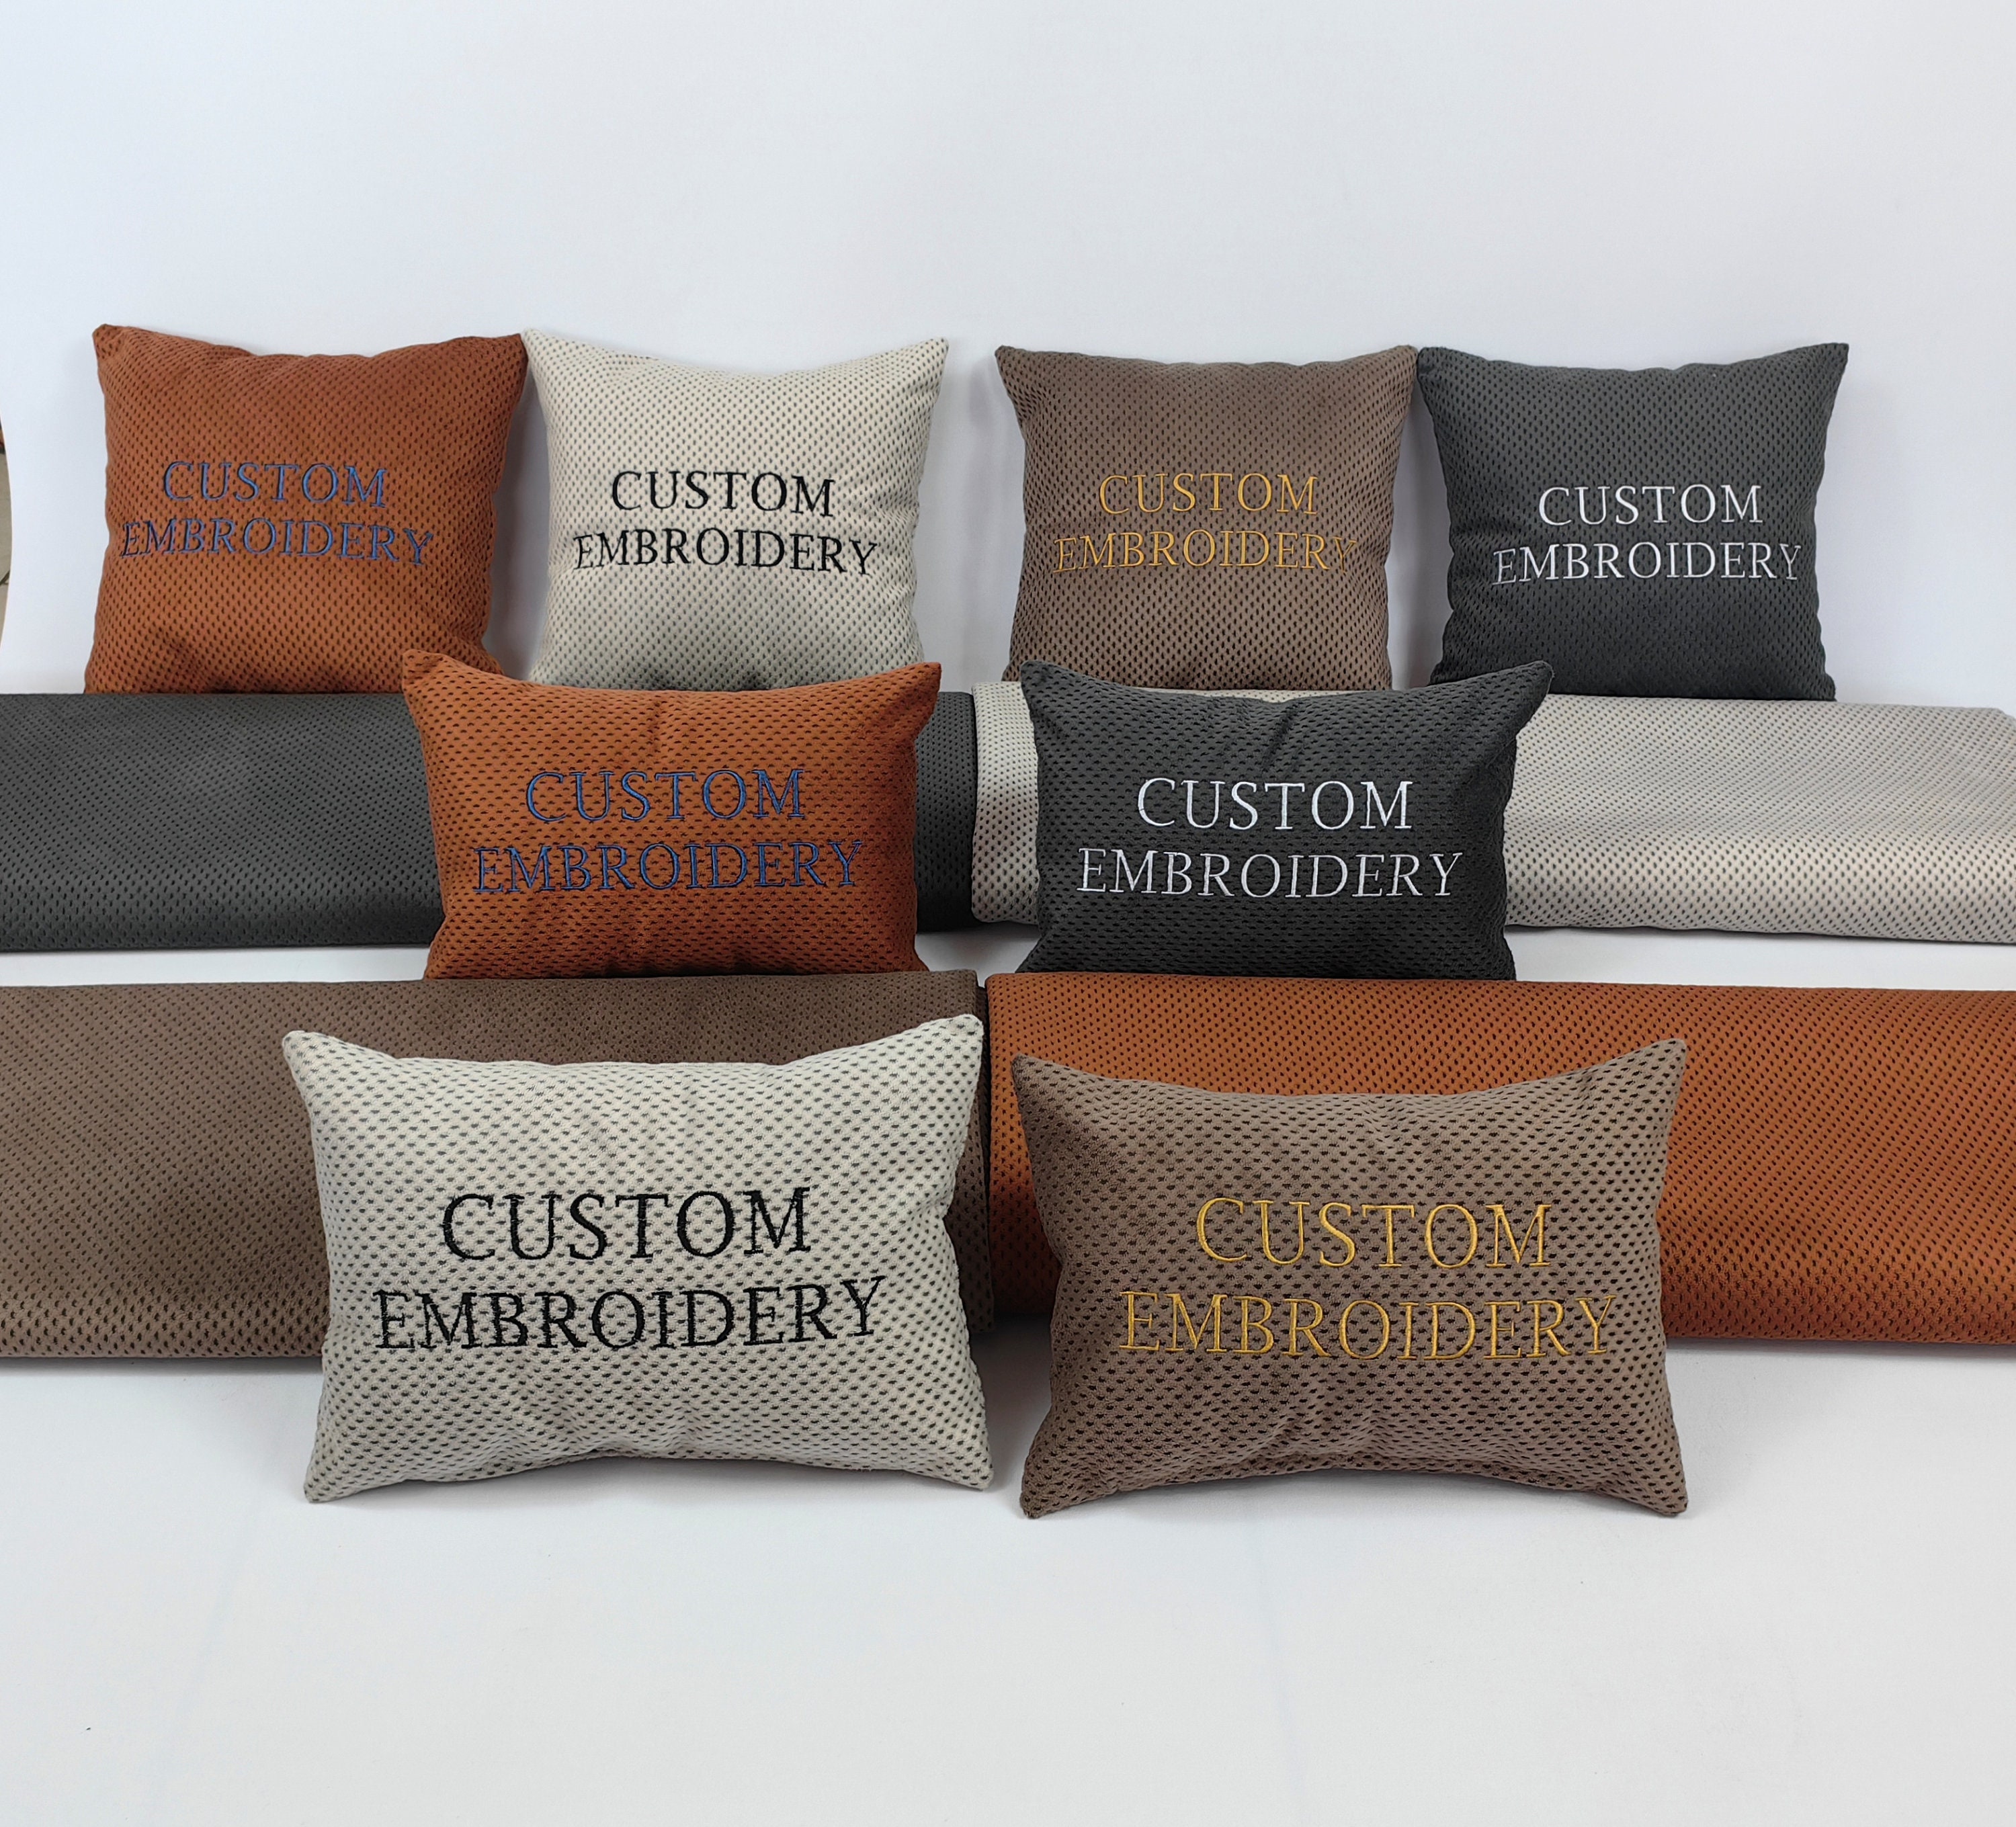 Personalized Custom Throw Pillow with Photo, Text, Custom Gifts